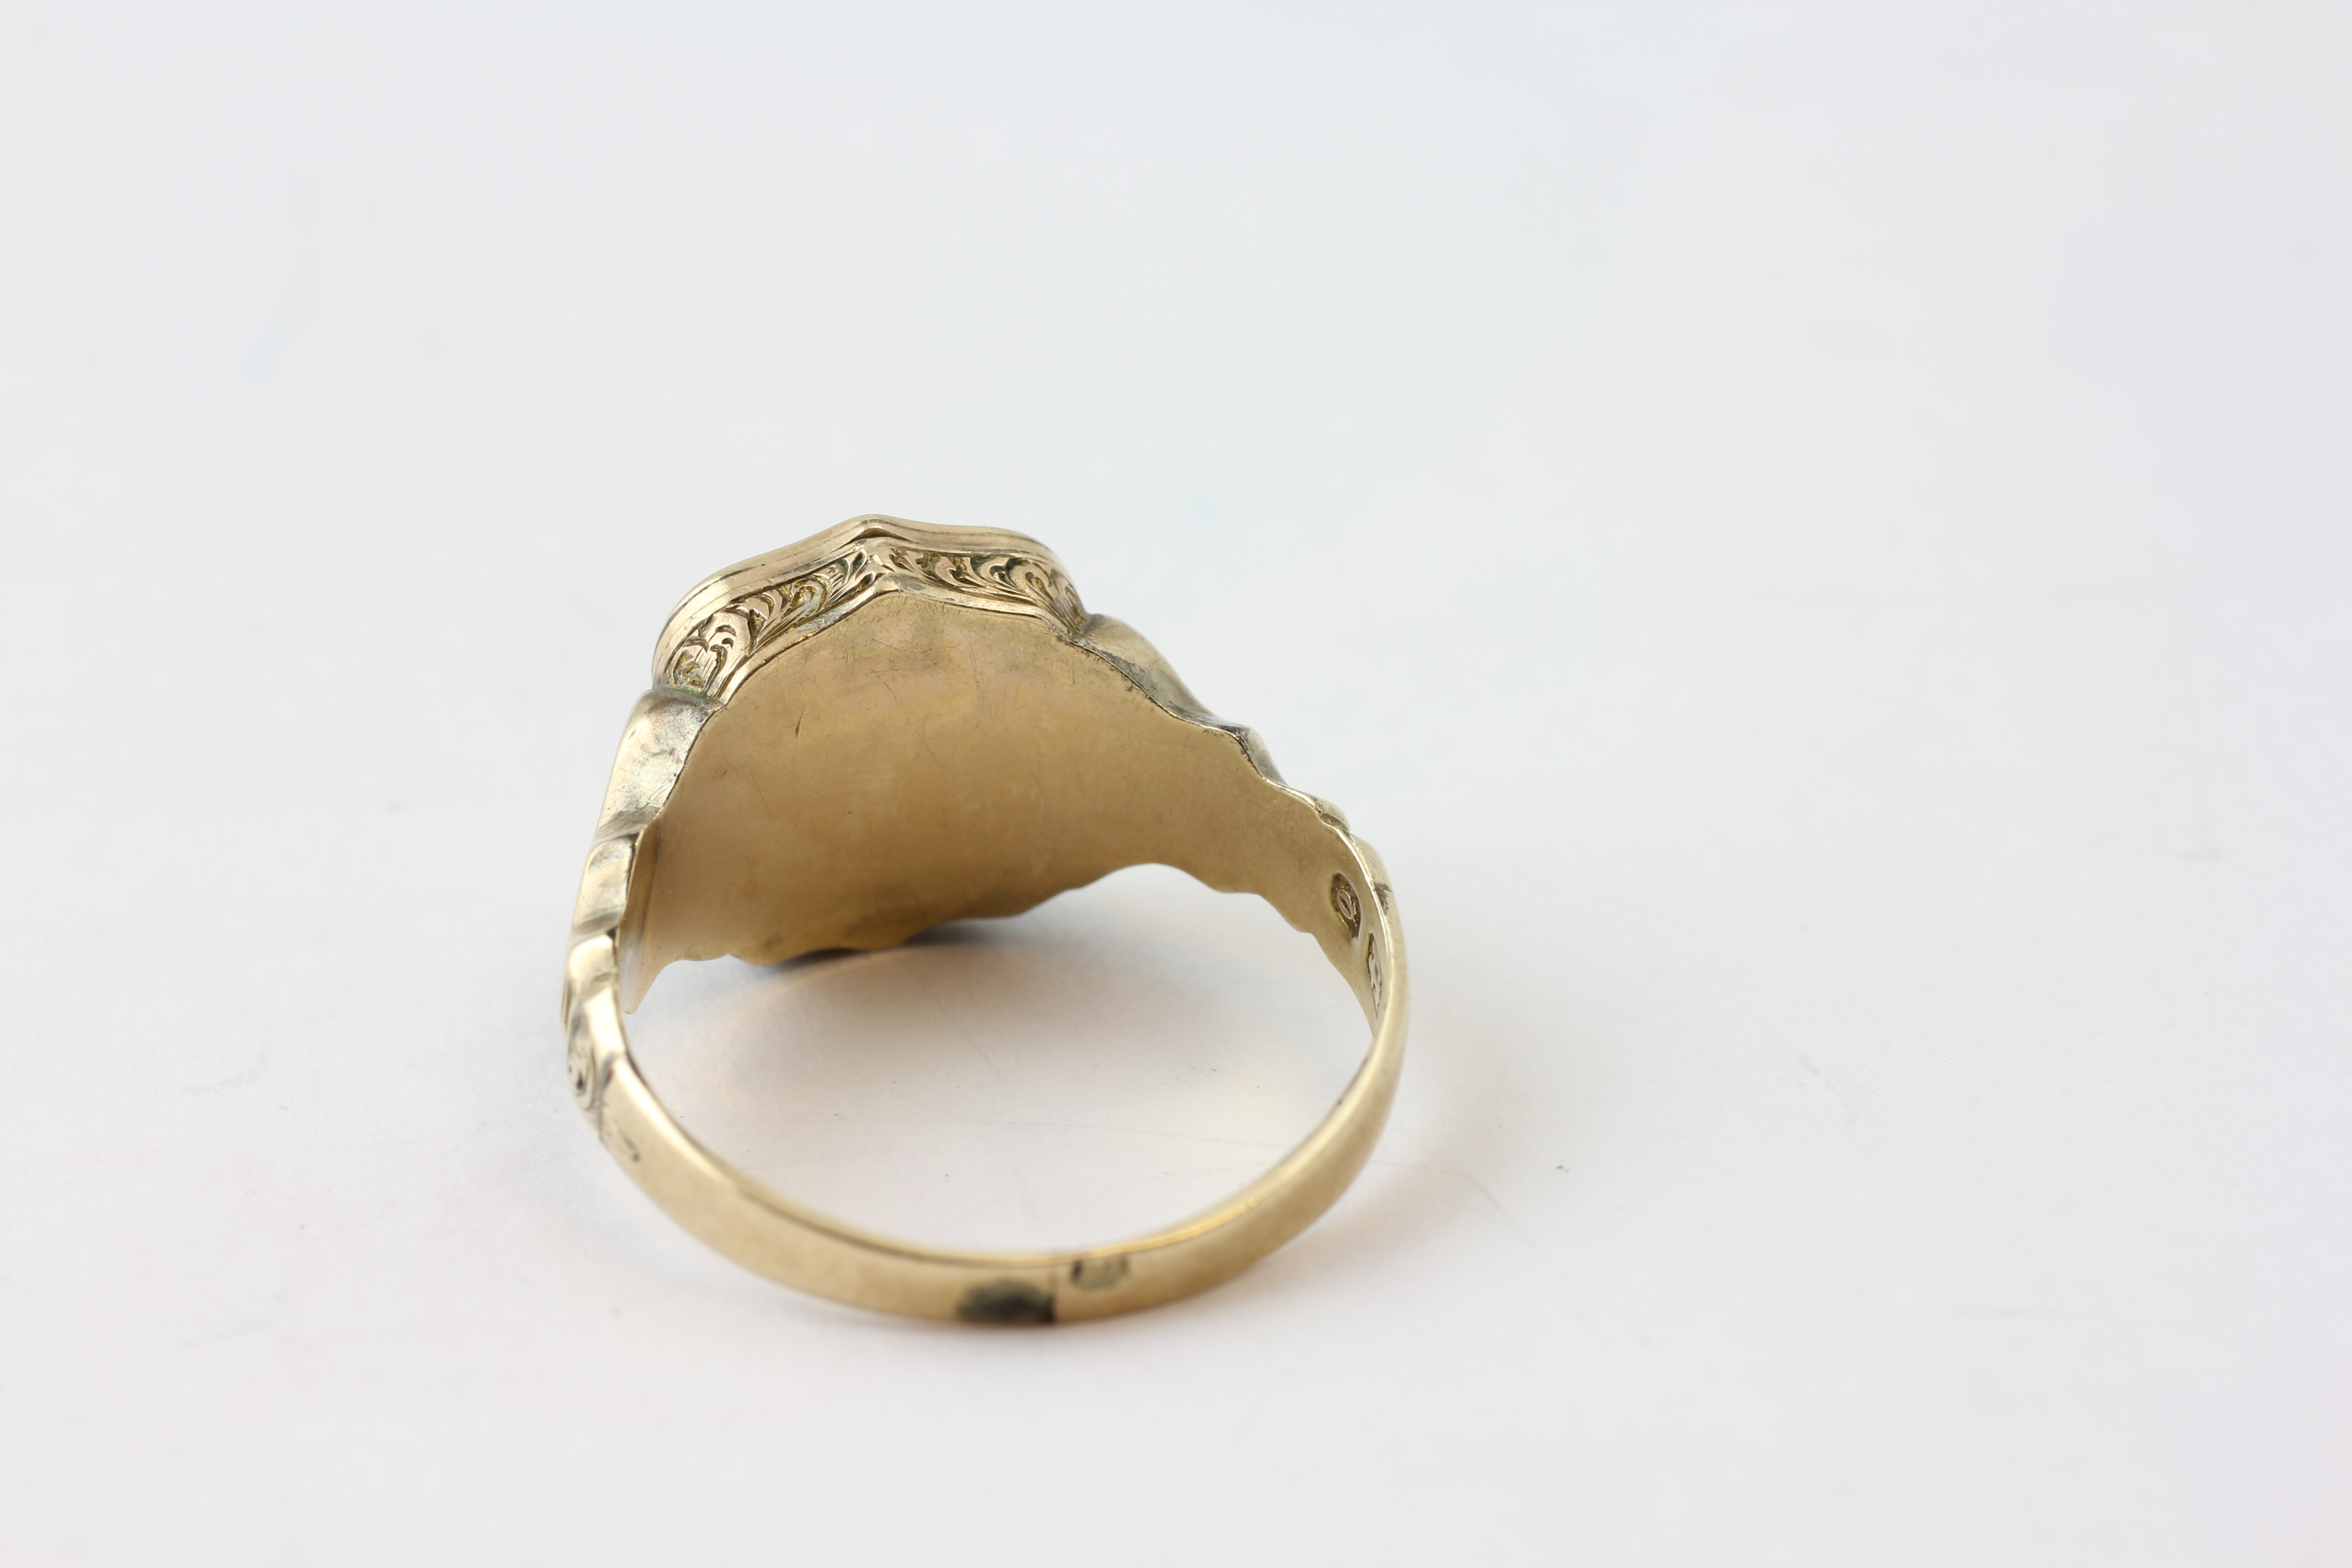 A 9CT GOLD SIGNET RING ENGRAVED WITH MONOGRAM, THE TOP HINGED REVEALING POCKET COMPARTMENT, - Image 4 of 8